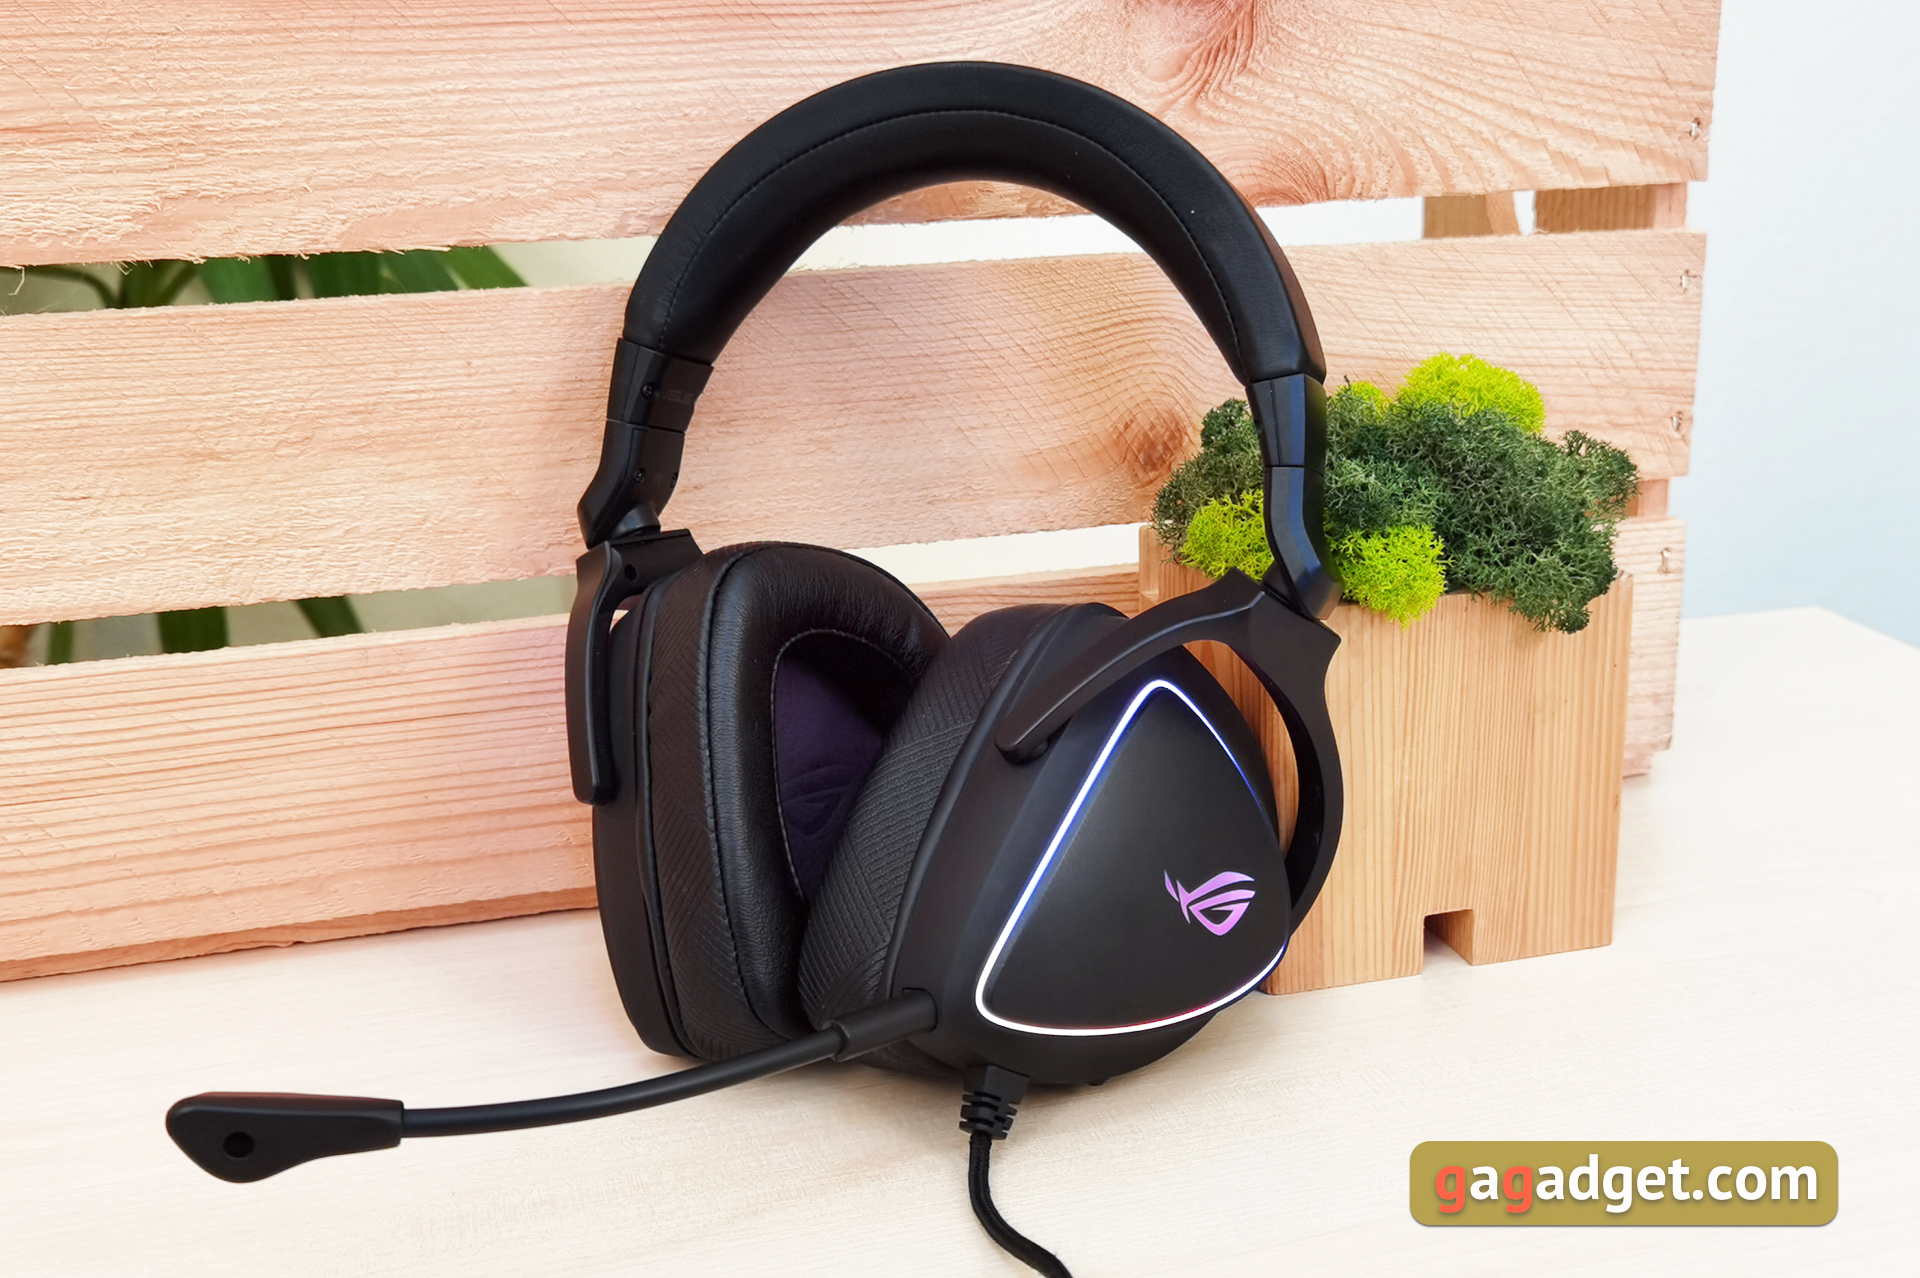 ASUS ROG Delta S USB-C Gaming Headset Review